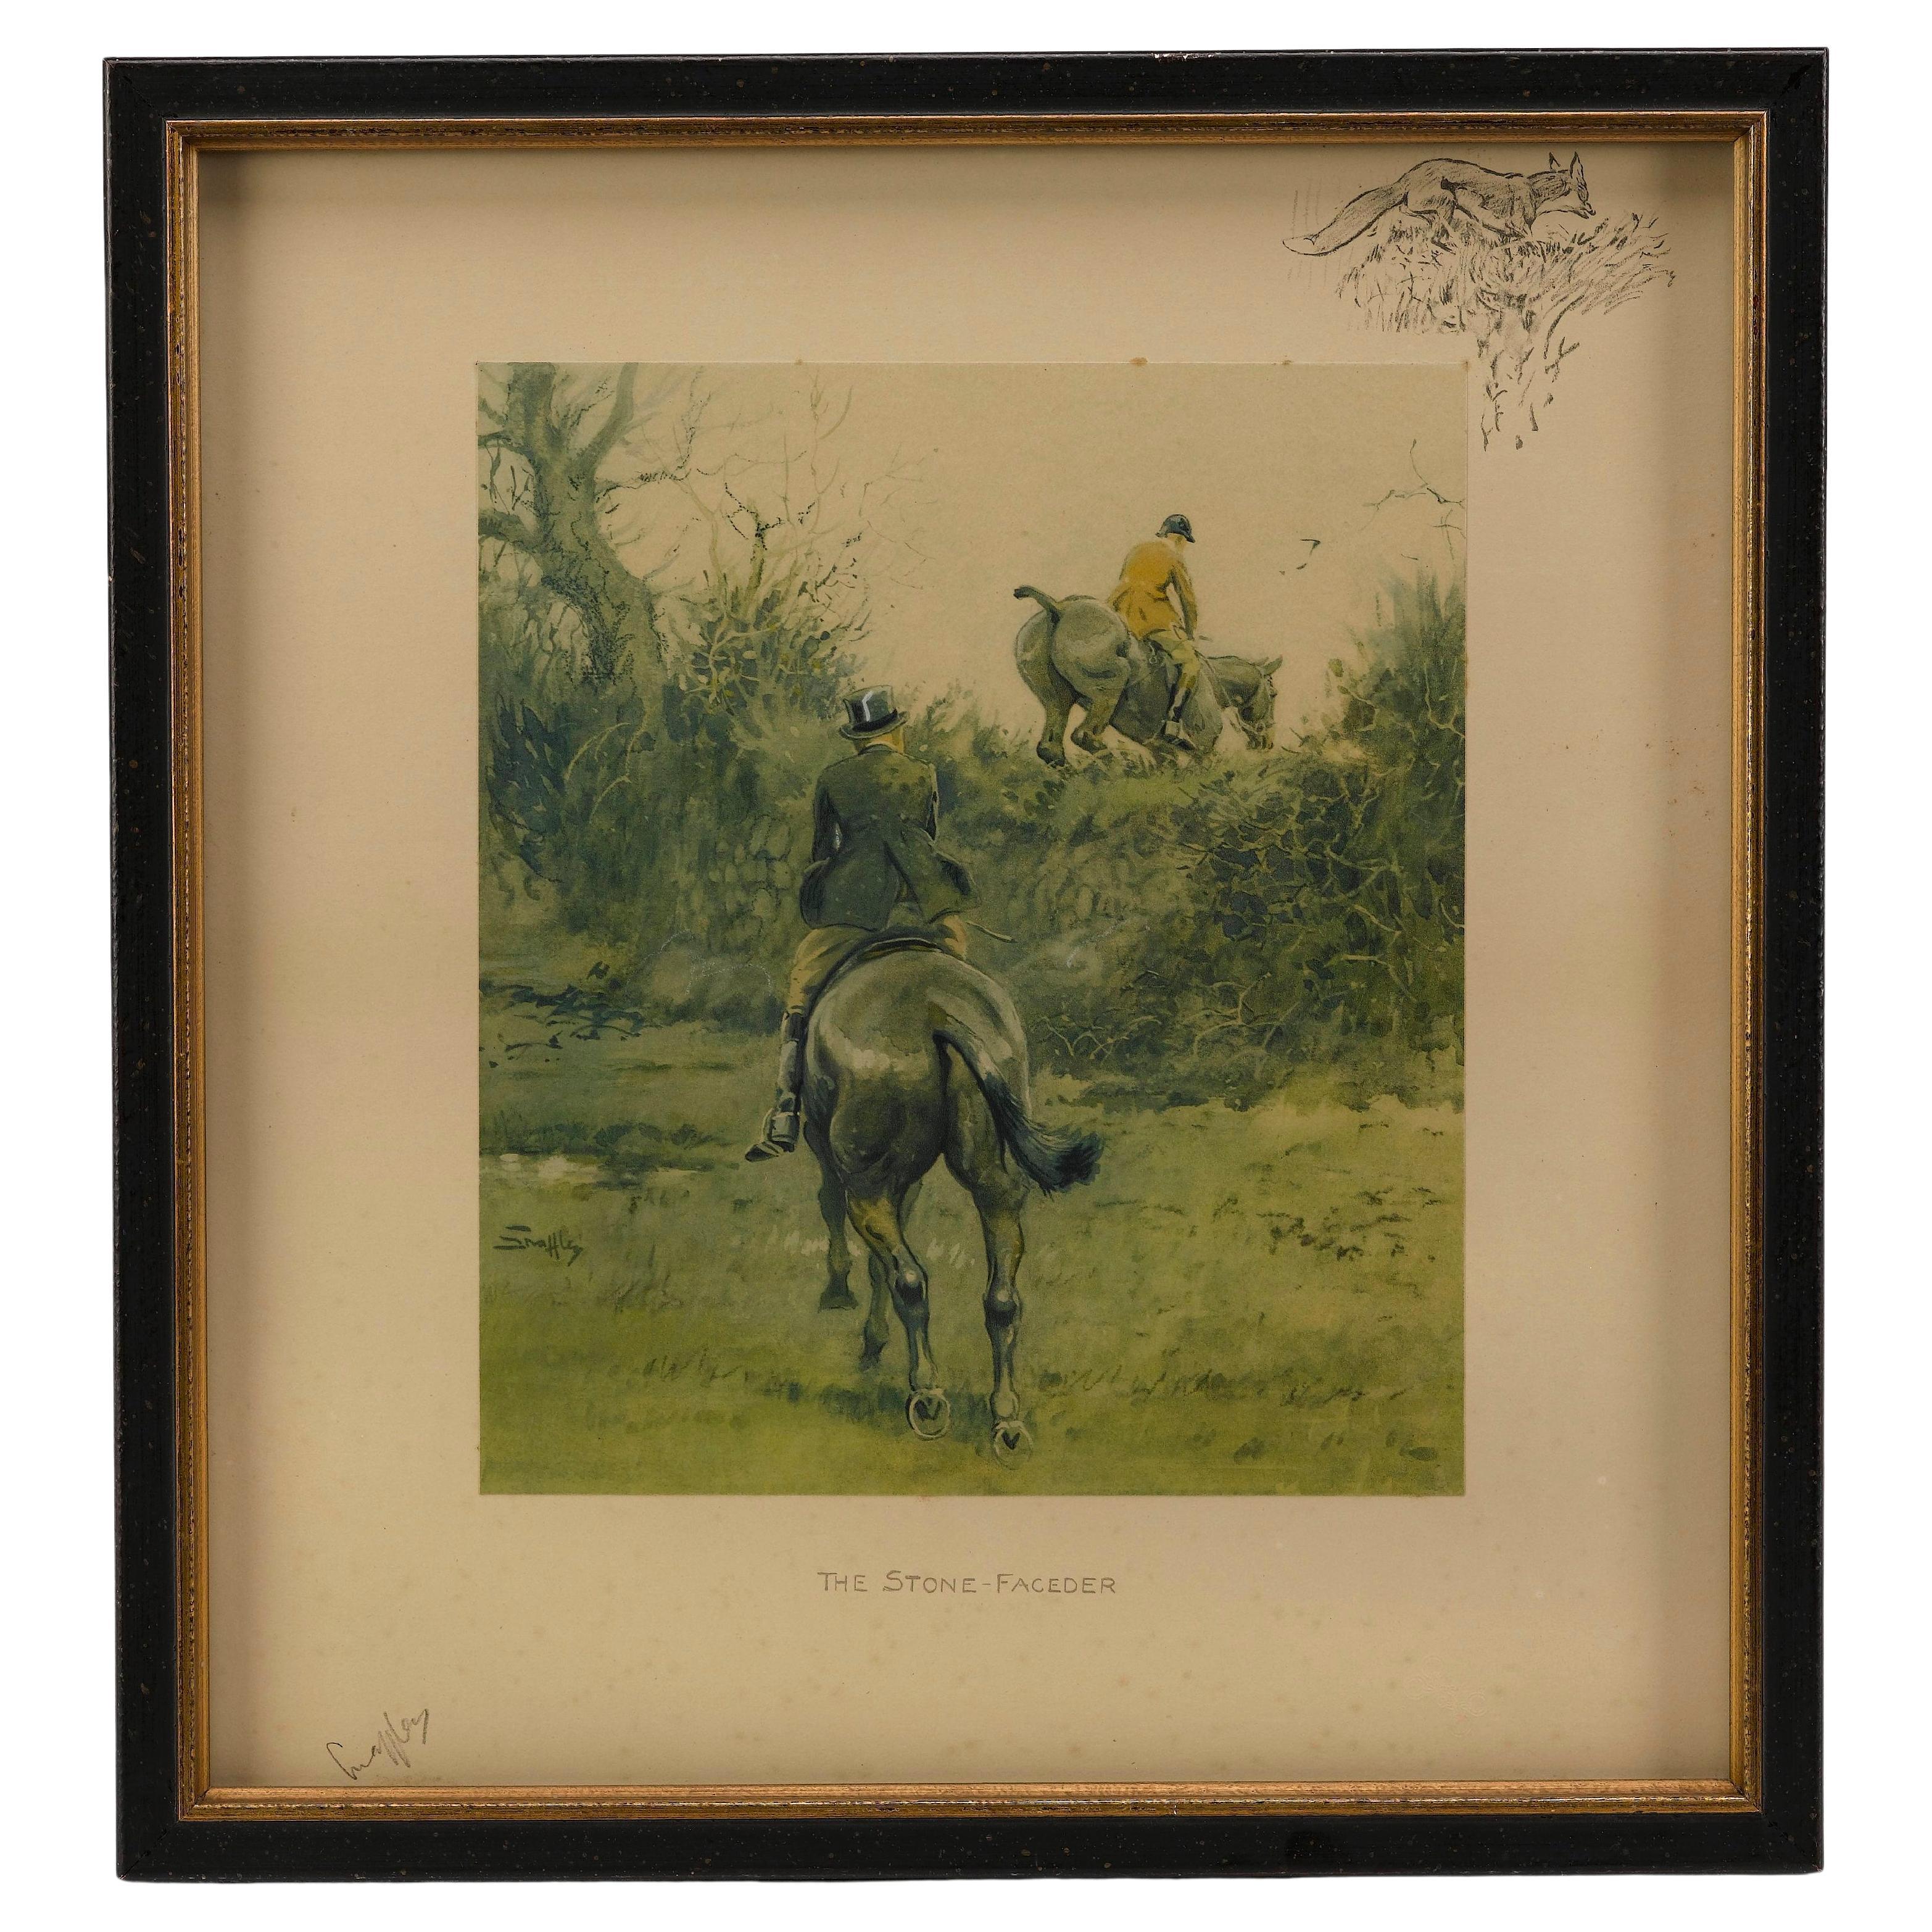 Antique Horse Print "The Stone Faceder" Signed by Snaffles, 1934 For Sale